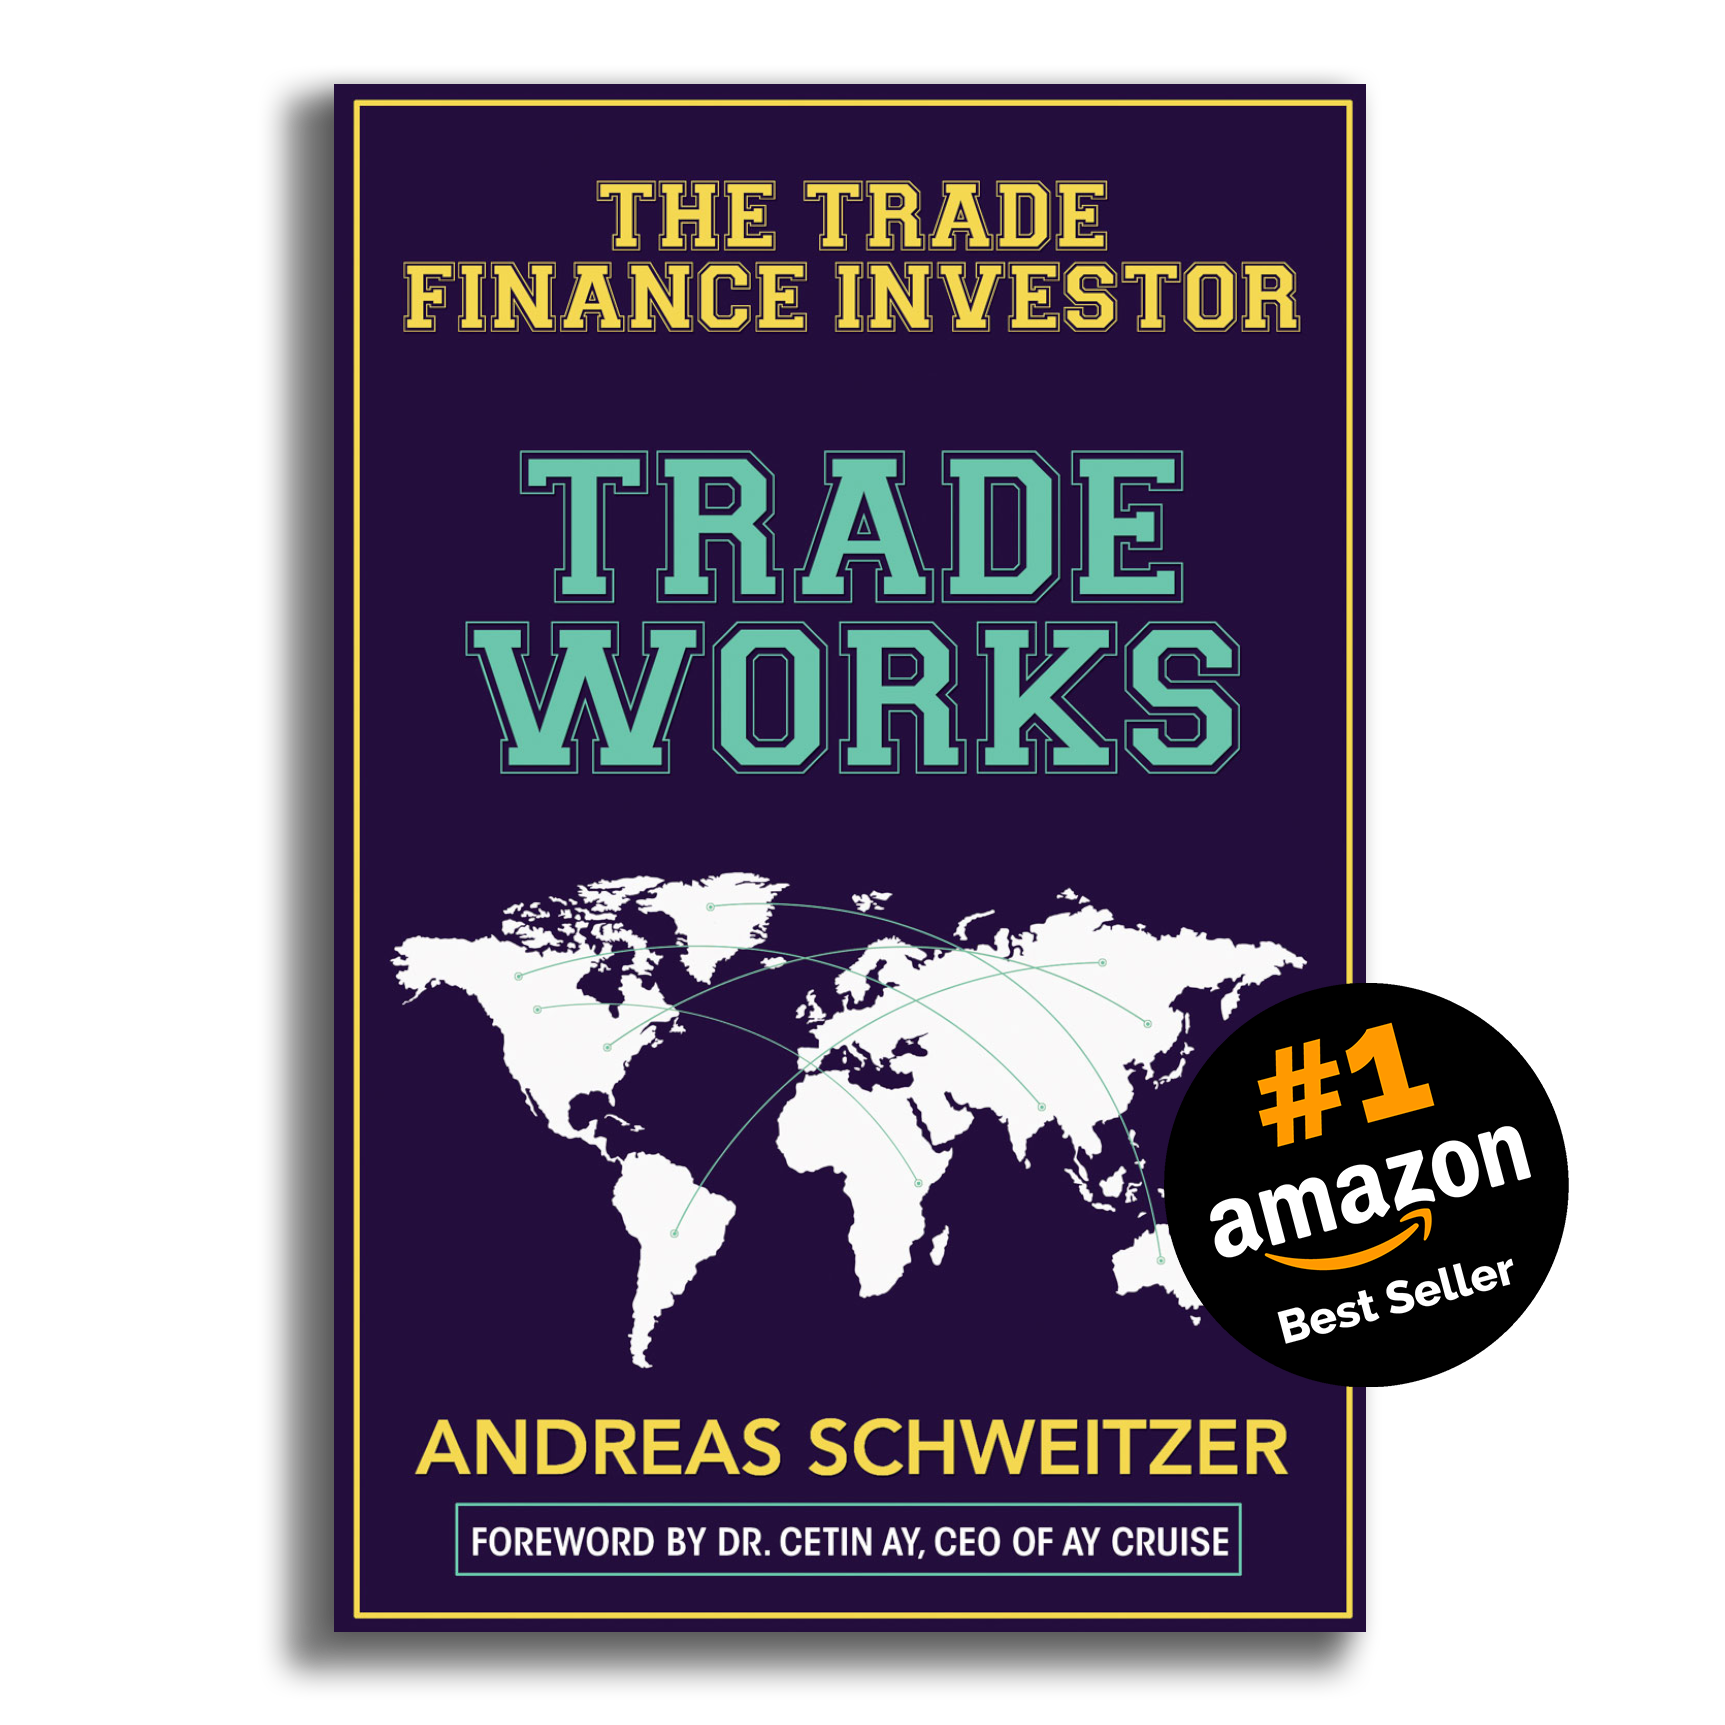 Trade works:The trade finance investor.